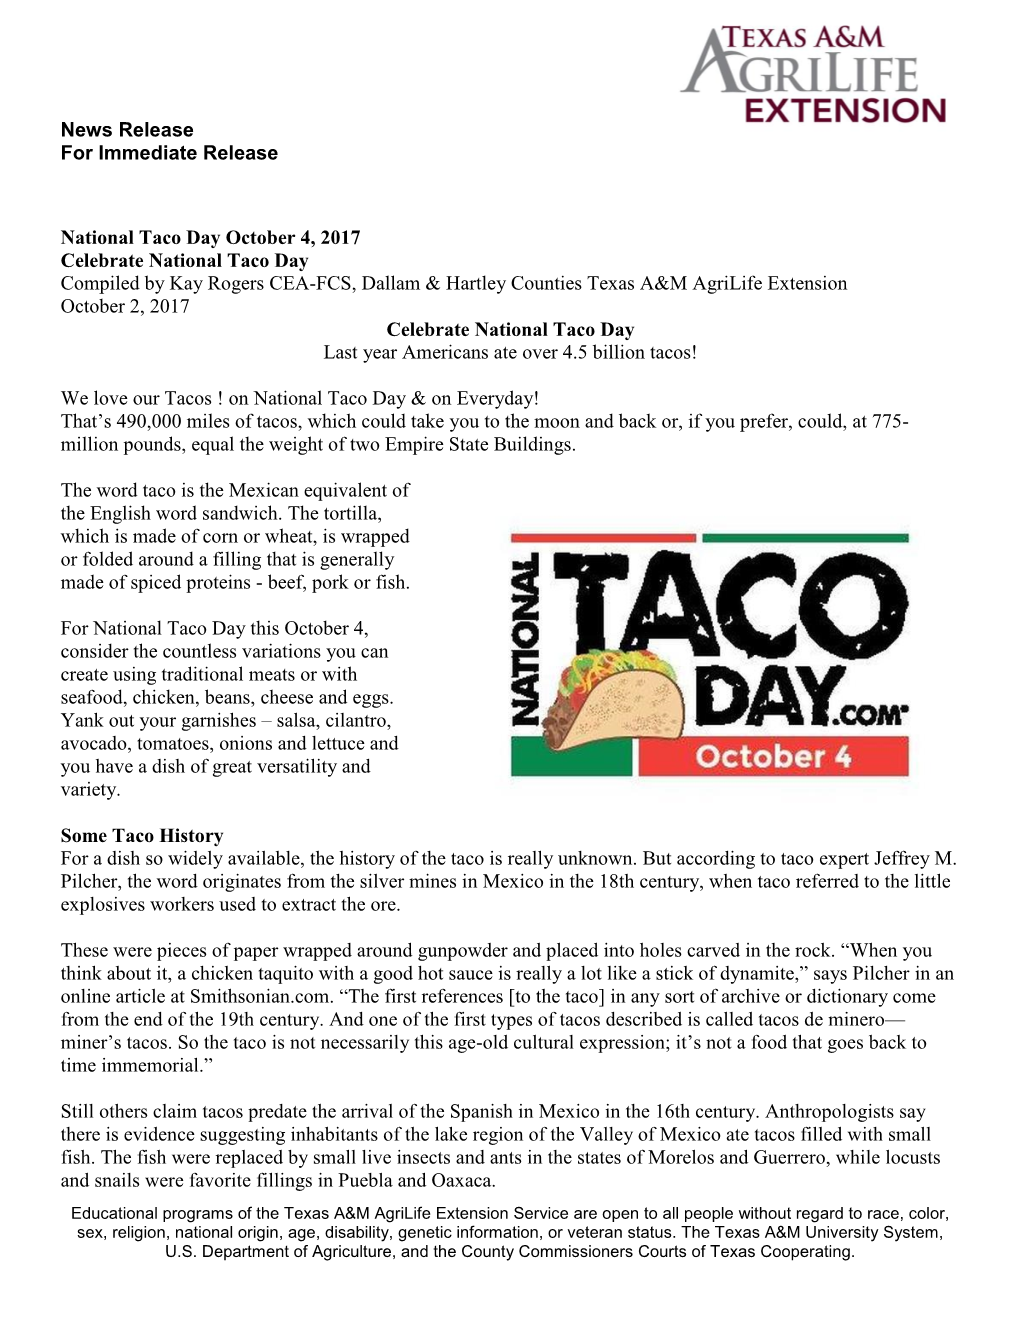 Article National Taco Day 10 2 2017